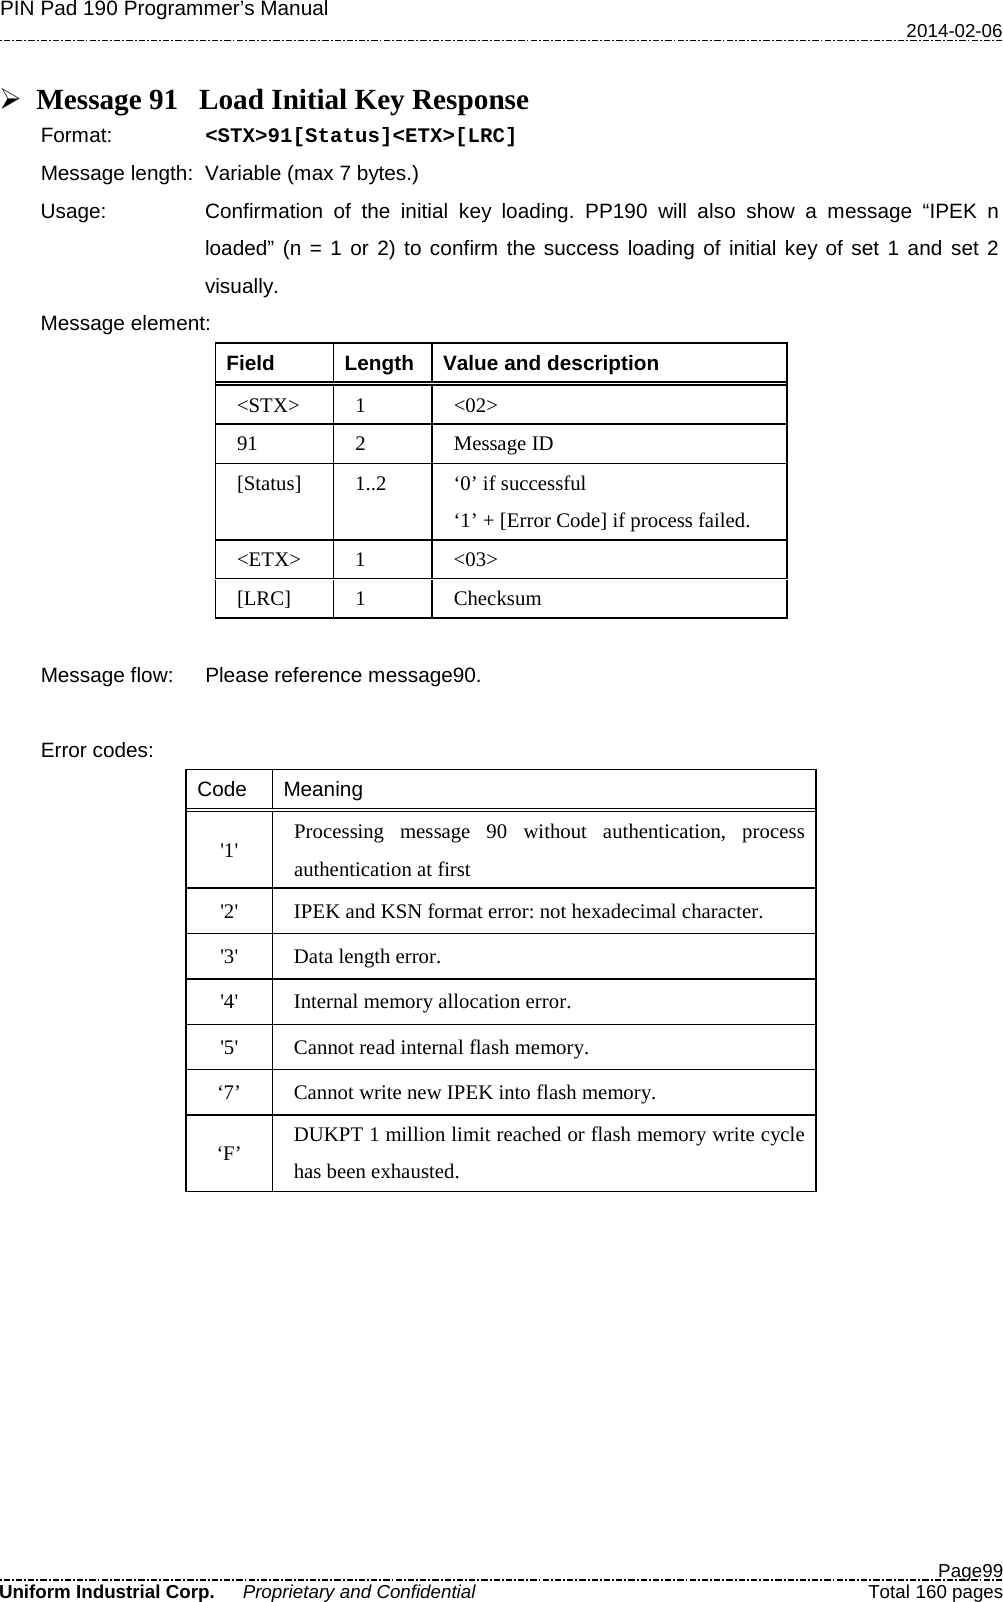 PIN Pad 190 Programmer’s Manual   2014-02-06  Page99 Uniform Industrial Corp. Proprietary and Confidential  Total 160 pages   Message 91 Load Initial Key Response Format:   &lt;STX&gt;91[Status]&lt;ETX&gt;[LRC] Message length: Variable (max 7 bytes.) Usage: Confirmation of the initial key loading. PP190 will also show a message “IPEK n loaded” (n = 1 or 2) to confirm the success loading of initial key of set 1 and set 2 visually. Message element:   Field  Length  Value and description &lt;STX&gt;  1  &lt;02&gt; 91  2  Message ID [Status]  1..2  ‘0’ if successful ‘1’ + [Error Code] if process failed. &lt;ETX&gt;  1  &lt;03&gt; [LRC]  1  Checksum  Message flow: Please reference message90.  Error codes: Code Meaning &apos;1&apos; Processing message 90 without authentication, process authentication at first &apos;2&apos; IPEK and KSN format error: not hexadecimal character. &apos;3&apos; Data length error. &apos;4&apos; Internal memory allocation error. &apos;5&apos;  Cannot read internal flash memory. ‘7’  Cannot write new IPEK into flash memory. ‘F’  DUKPT 1 million limit reached or flash memory write cycle has been exhausted.  